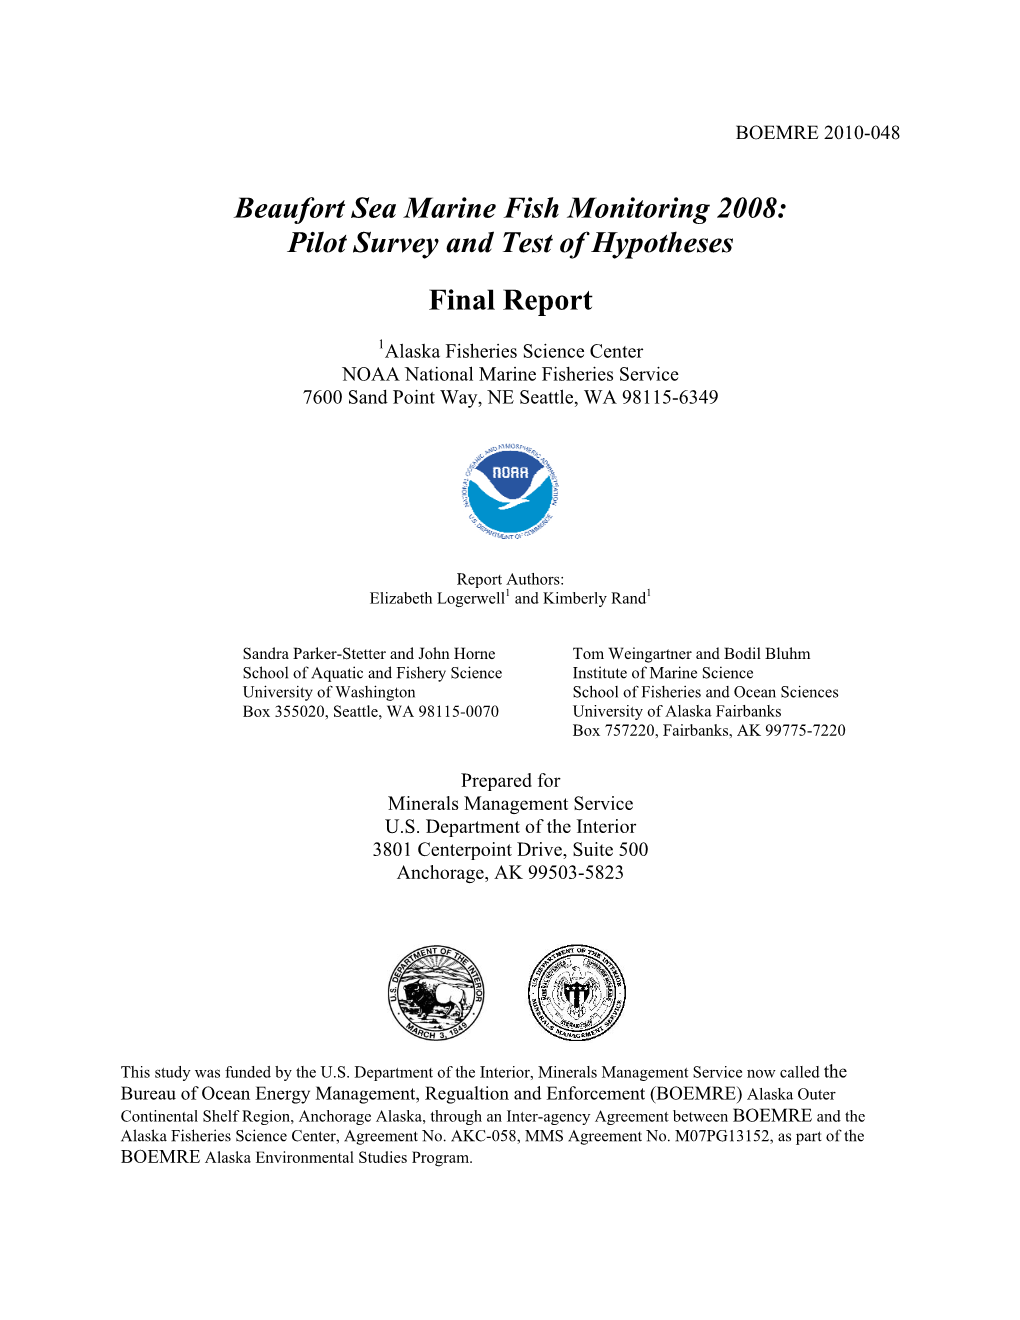 Beaufort Sea Marine Fish Monitoring 2008: Pilot Survey and Test of Hypotheses